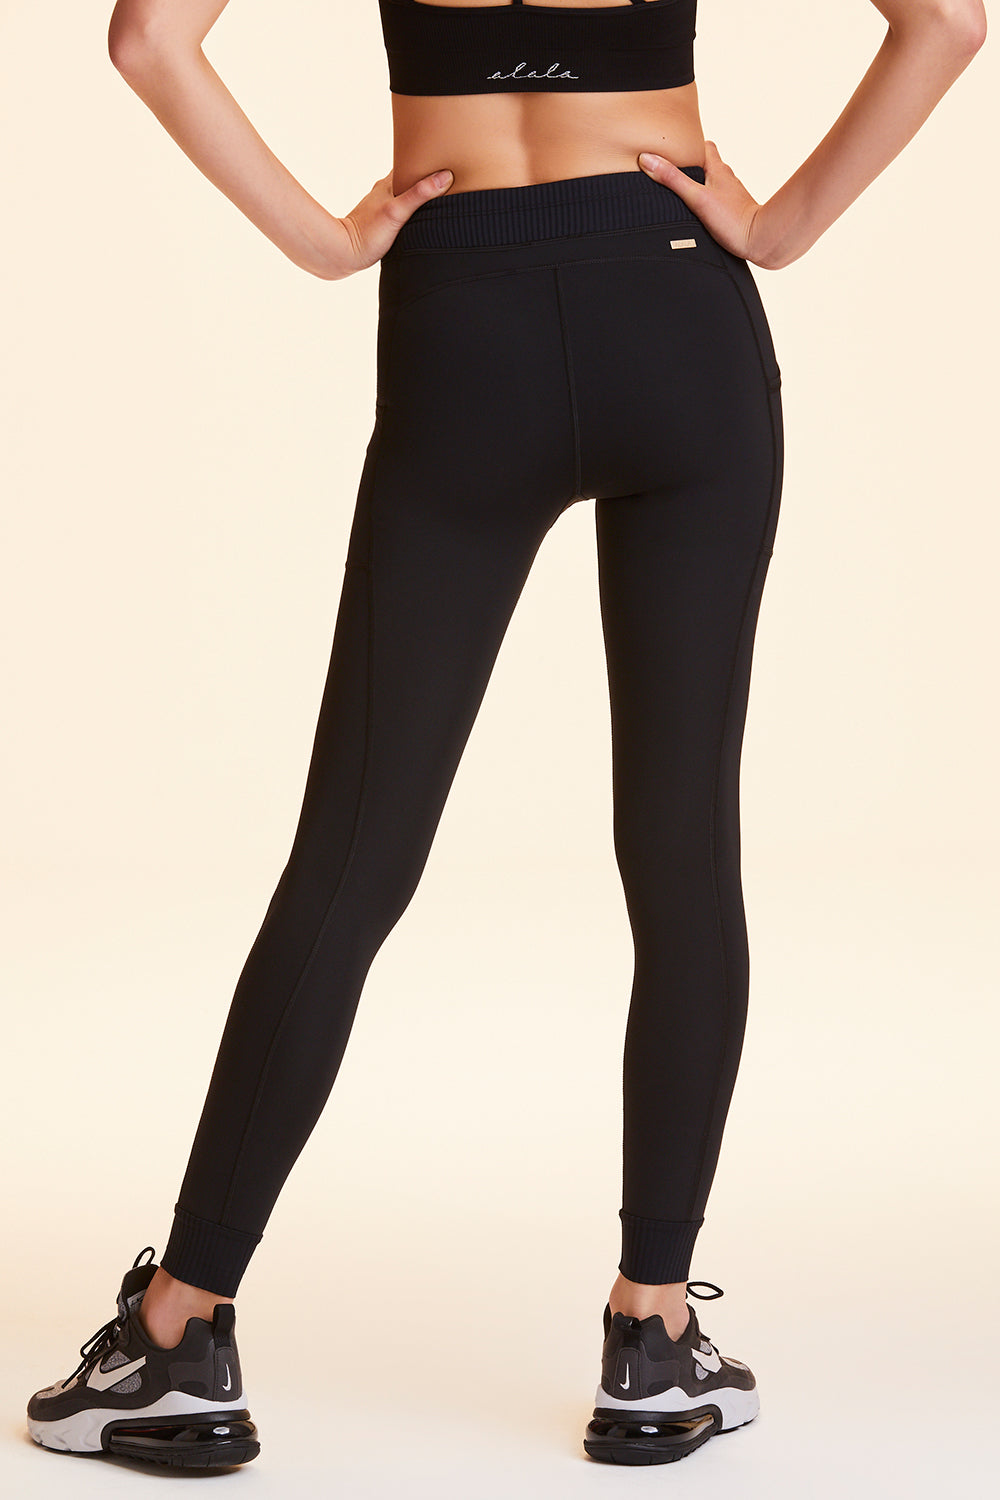 Back view of Alala Women's Luxury Athleisure black jogger-style tight